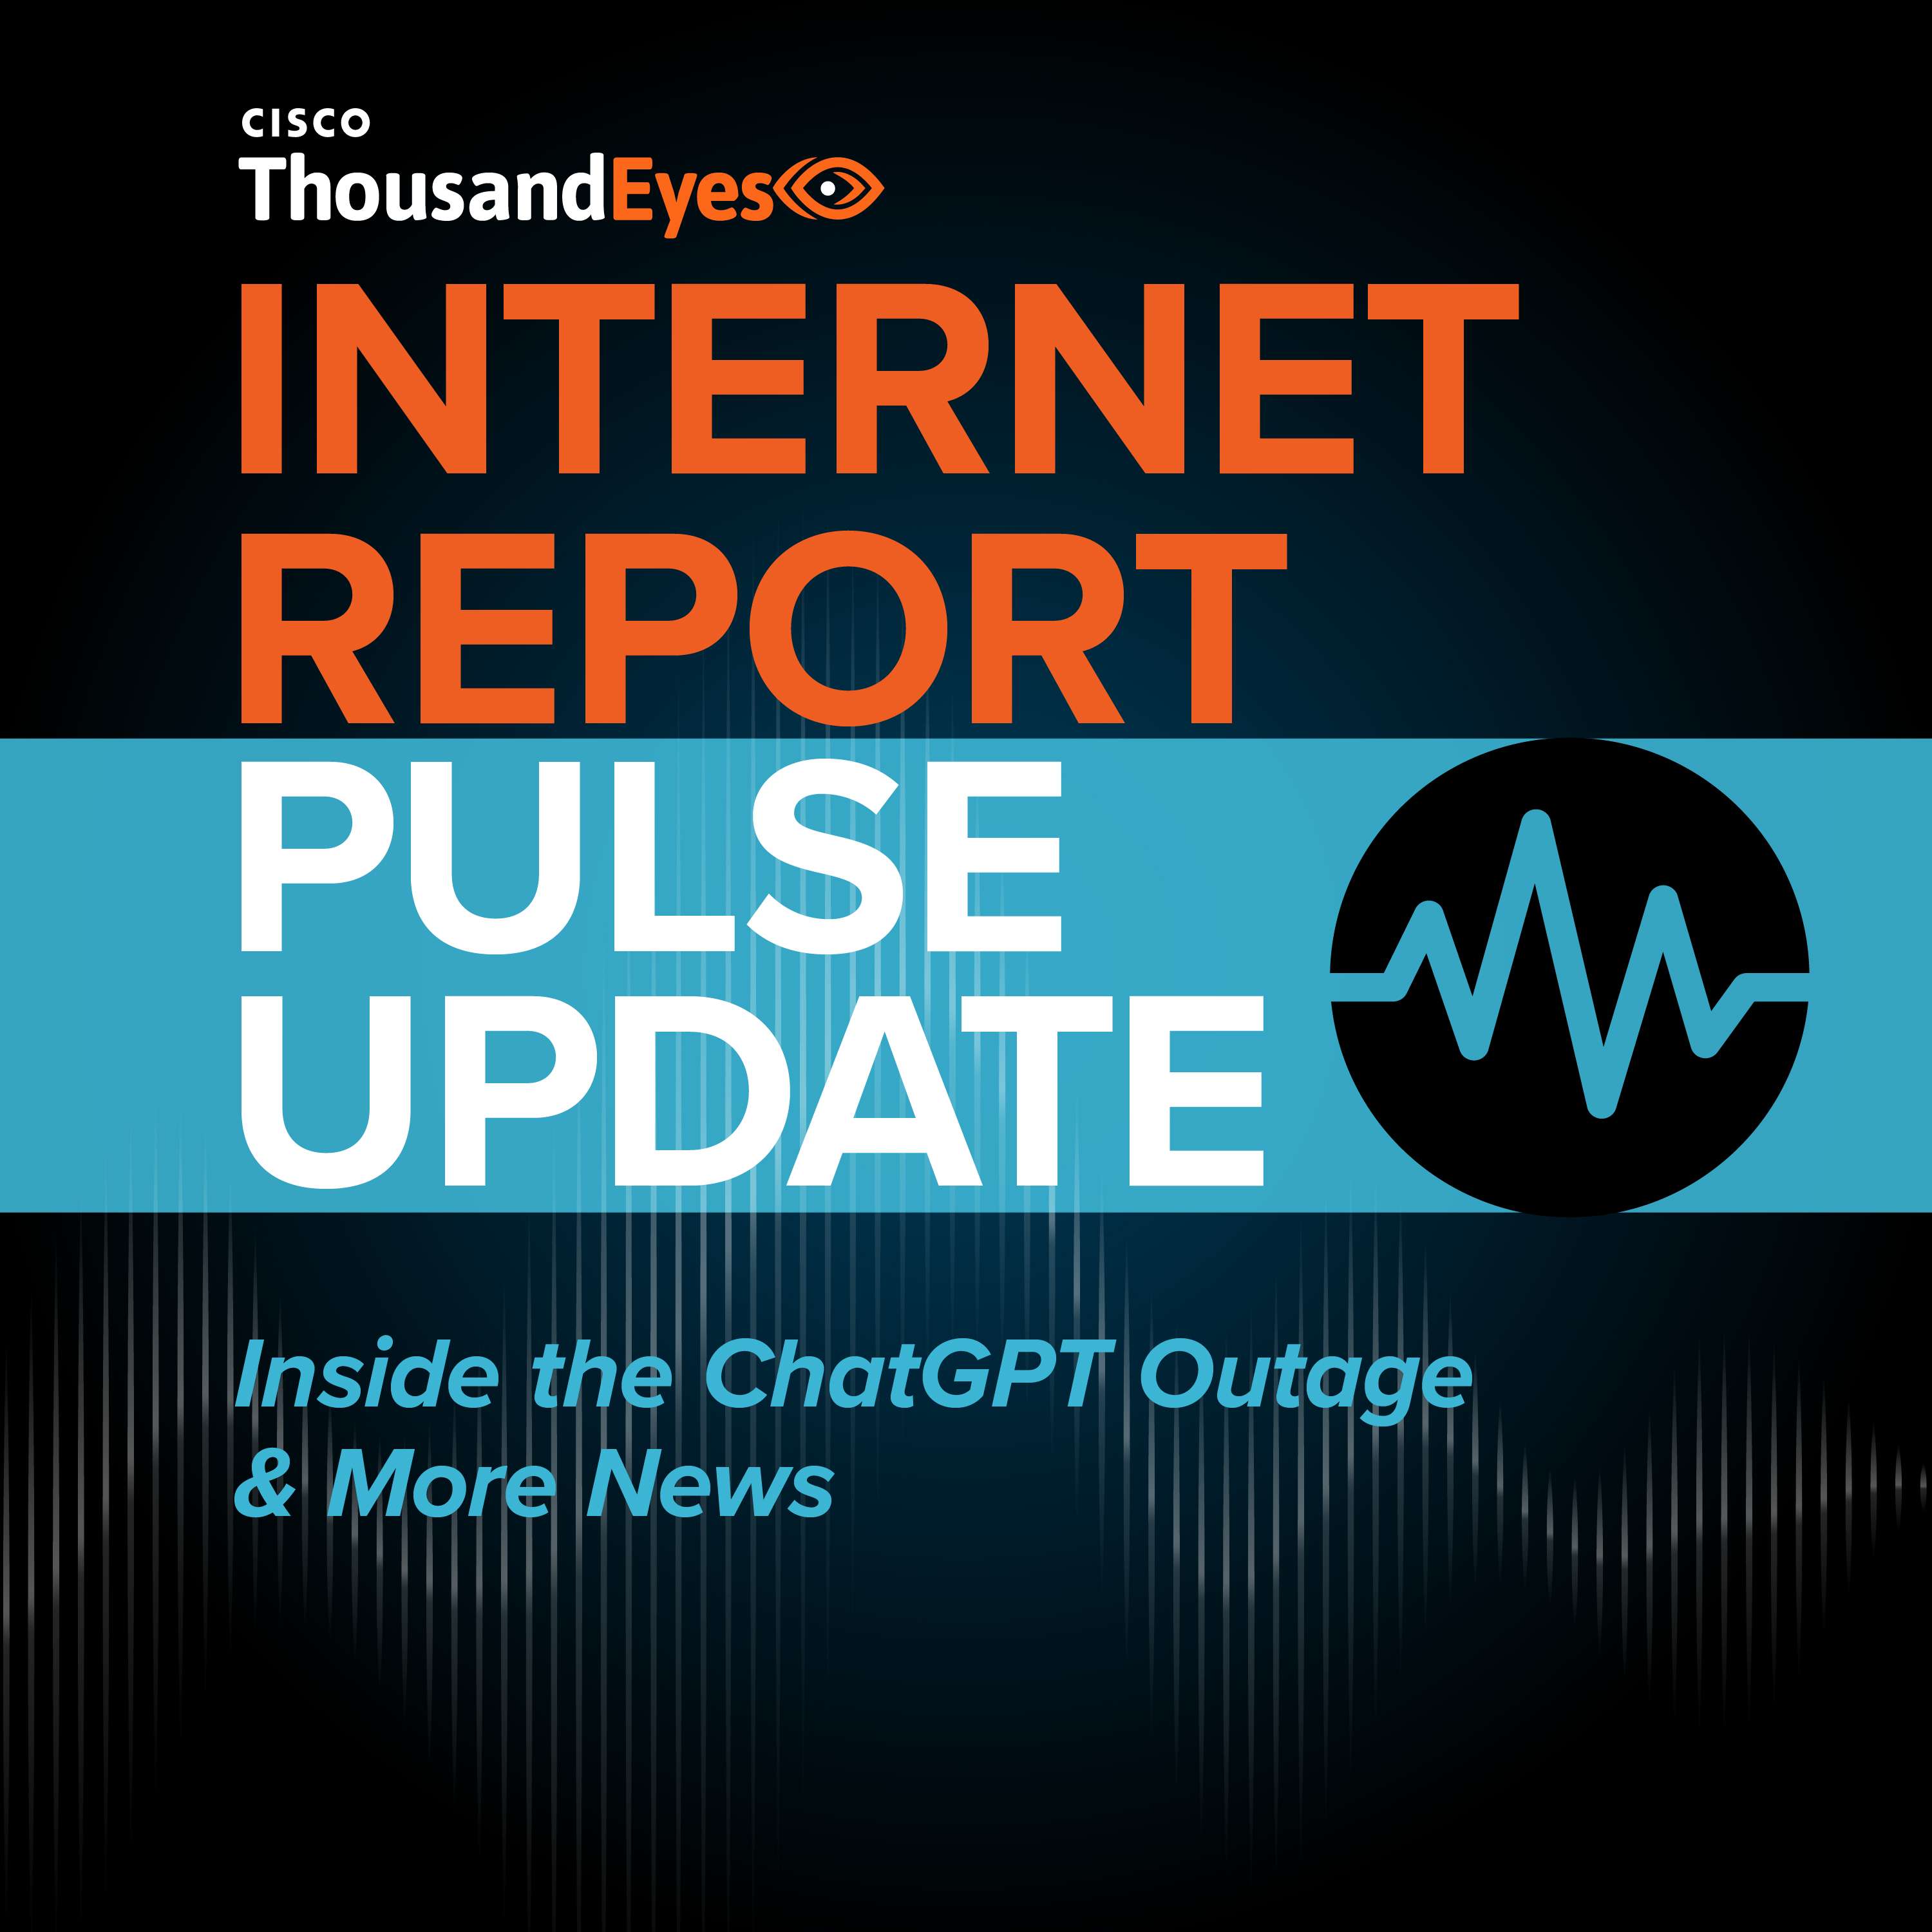 Inside the ChatGPT Outage & More News | Pulse Update